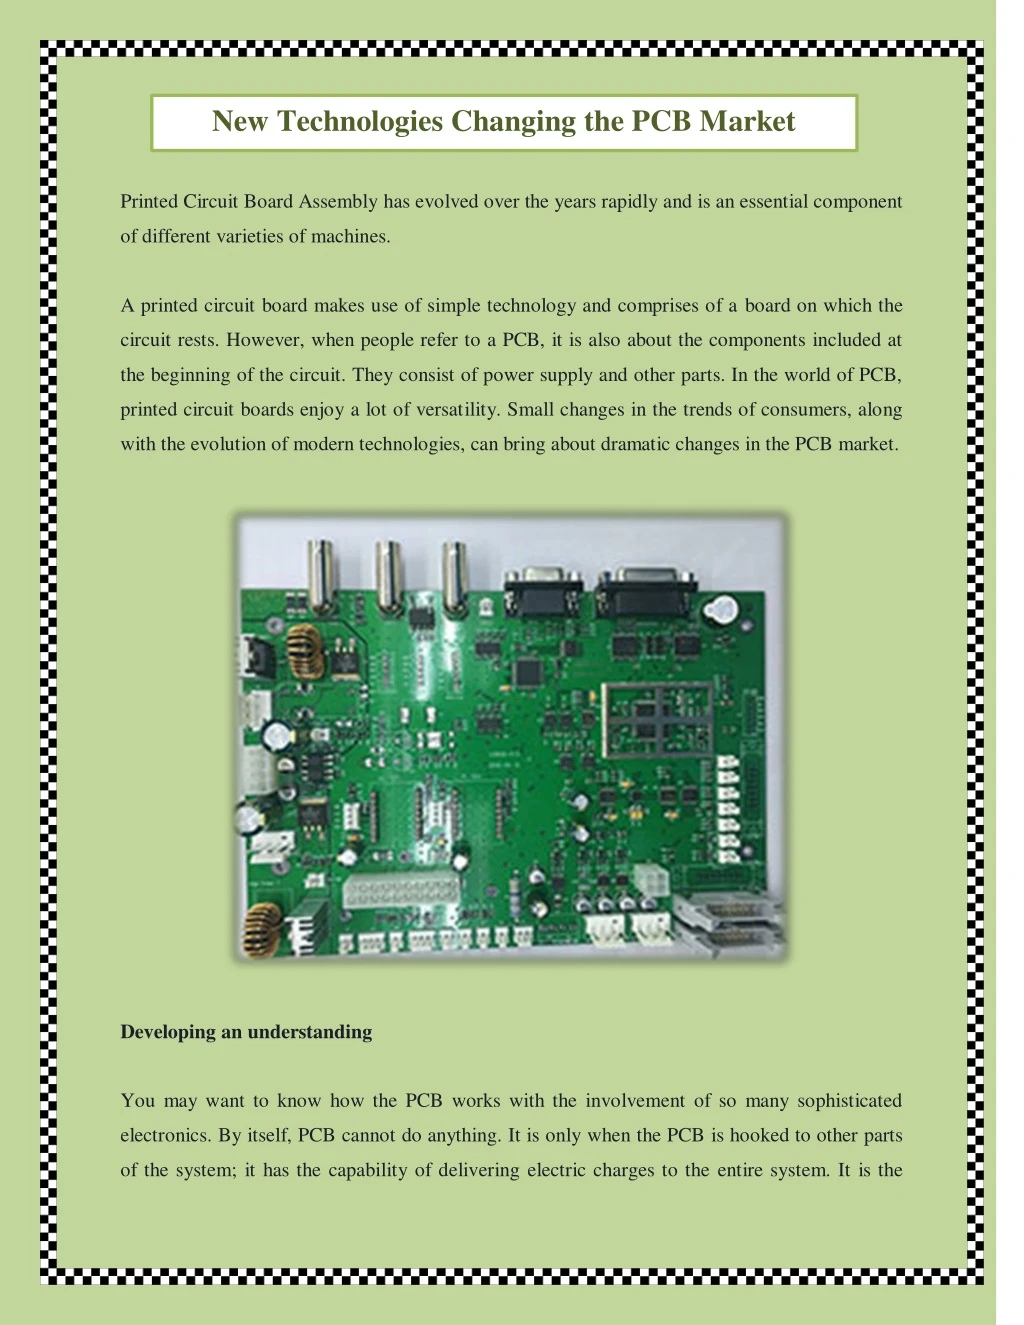 new technologies changing the pcb market